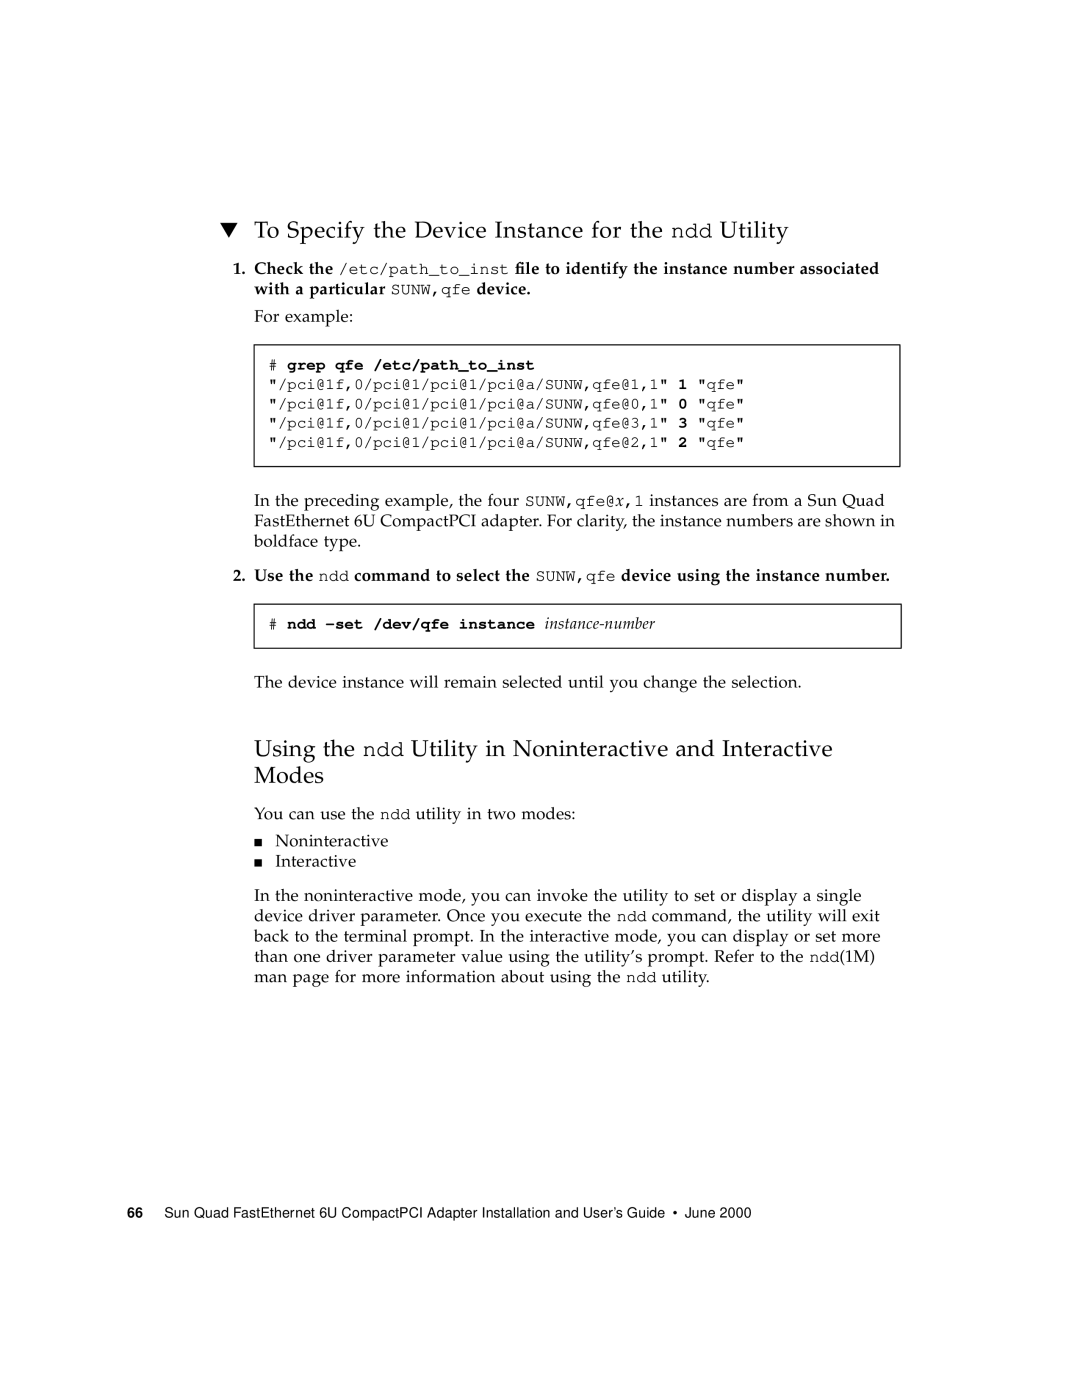 Sun Microsystems 6U manual To Specify the Device Instance for the ndd Utility 